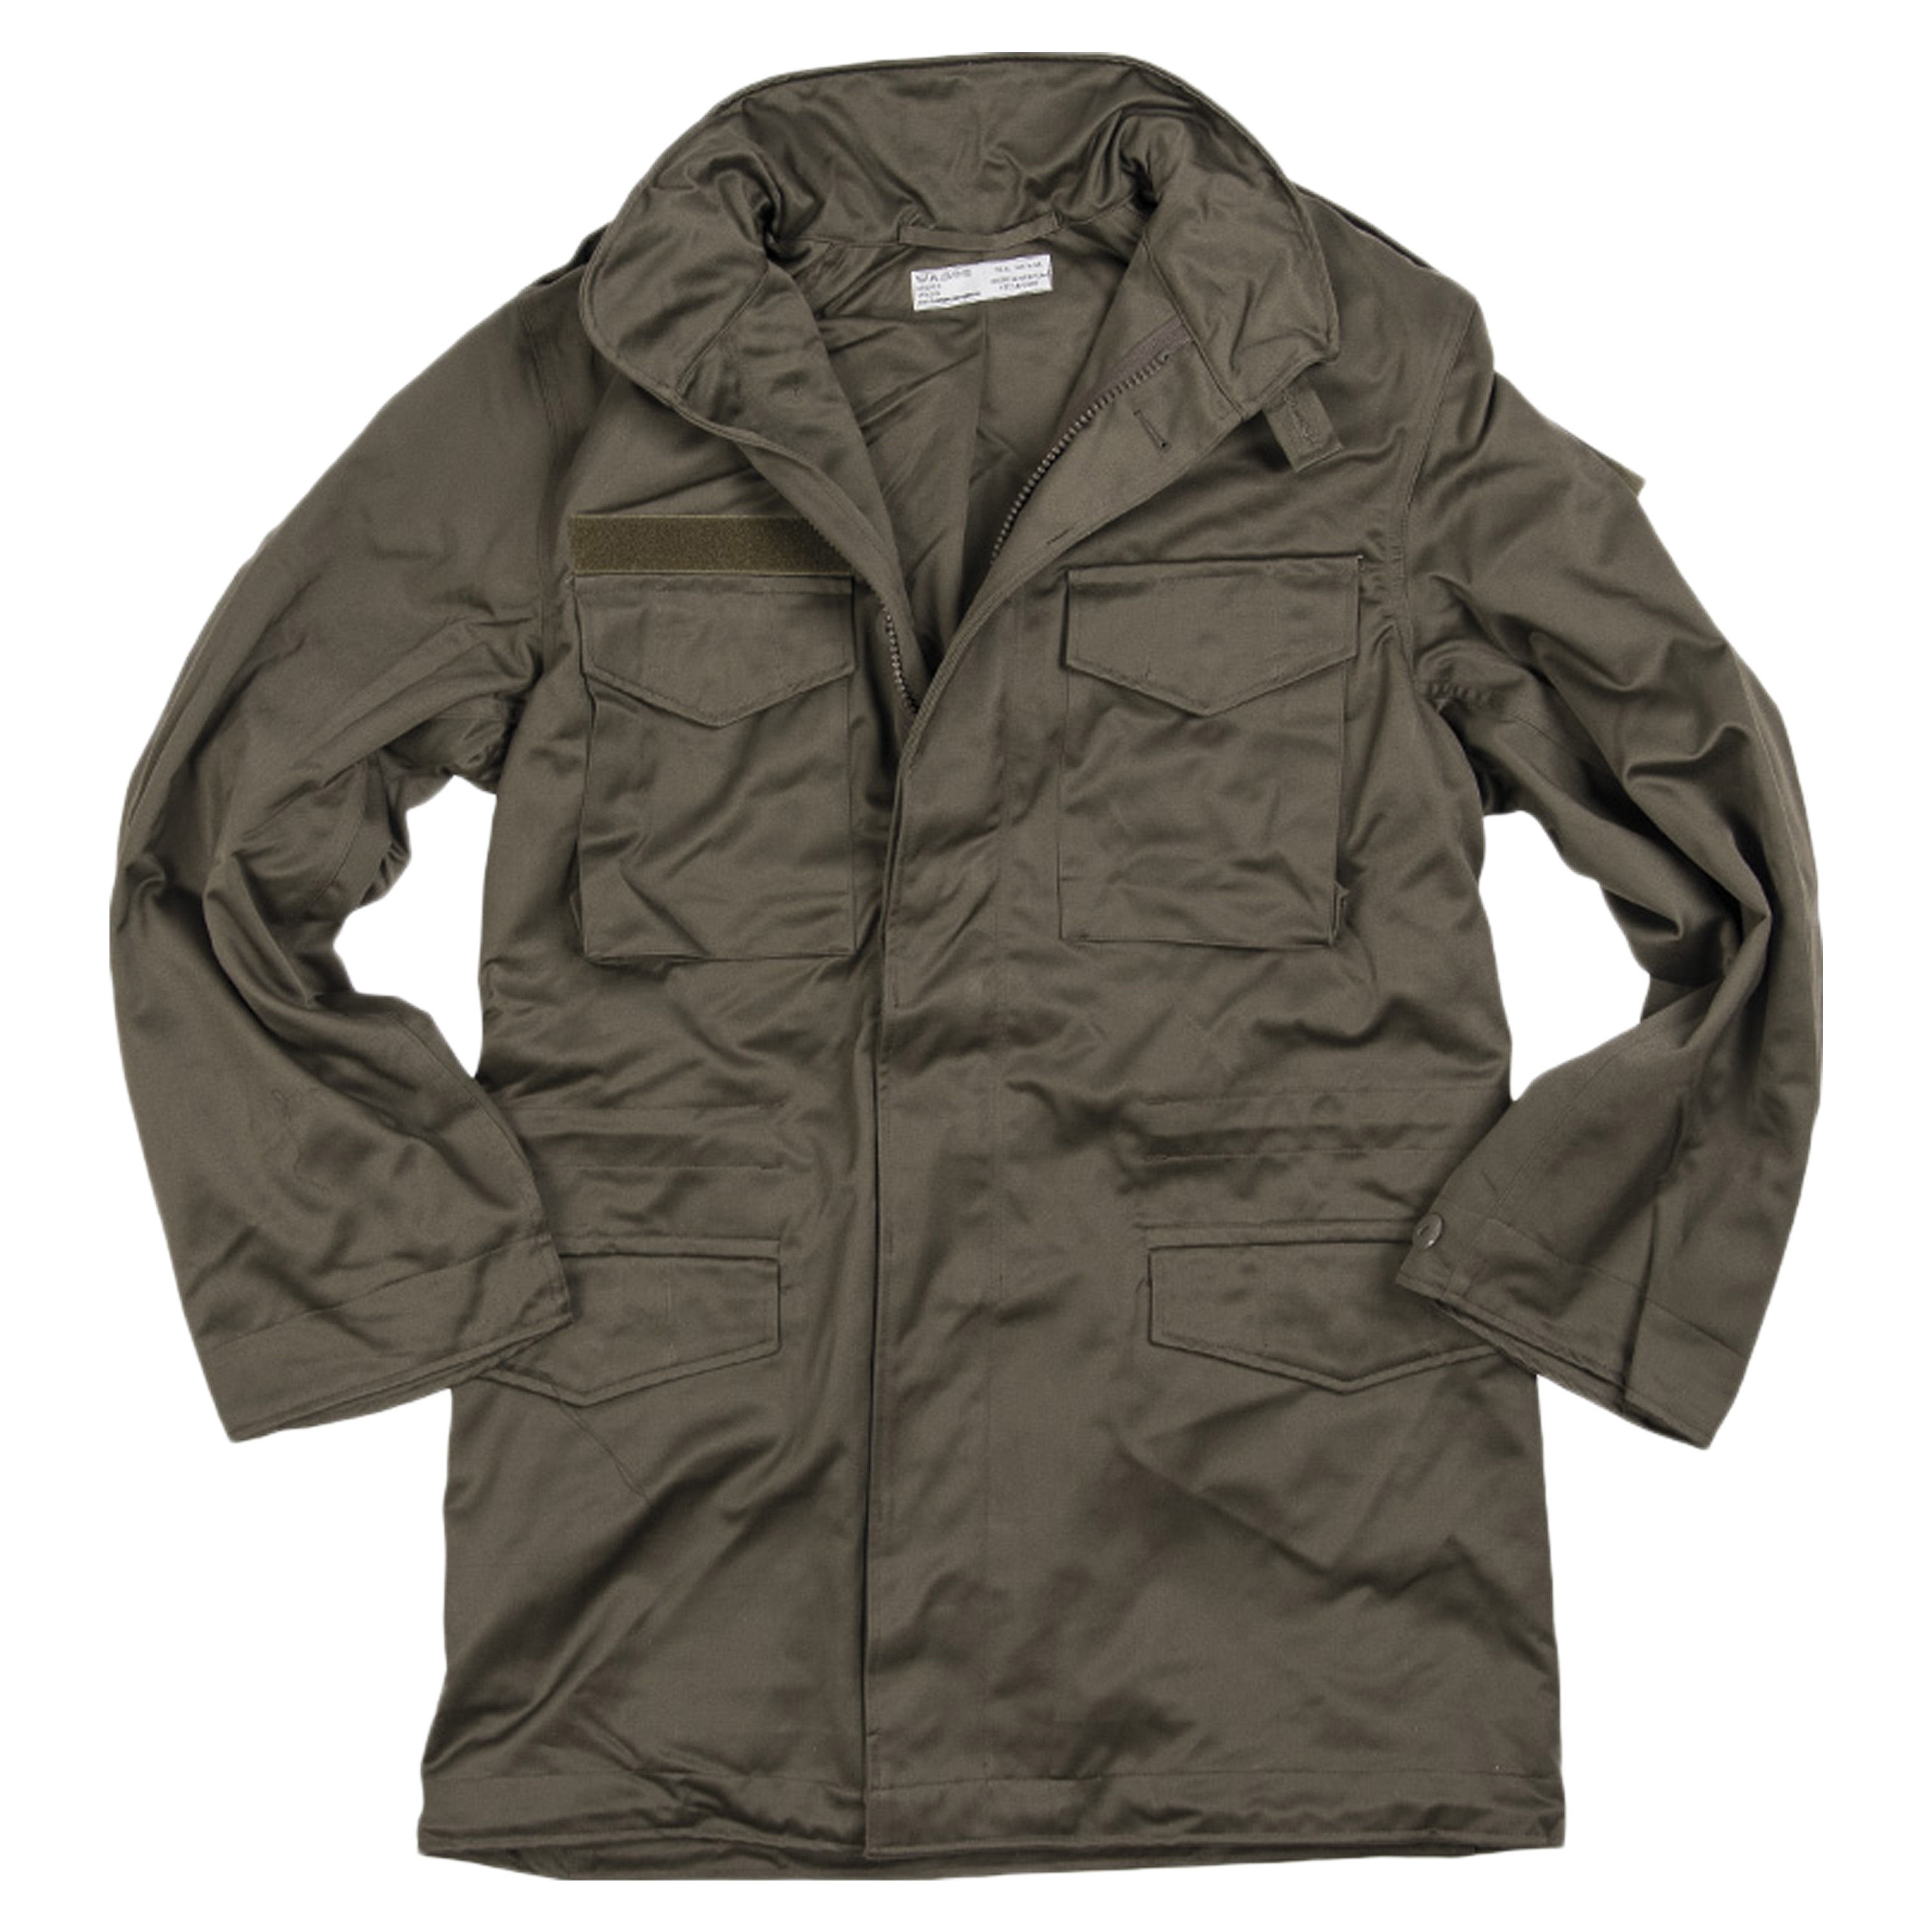 Purchase the Austrian Field Jacket Like New olive by ASMC